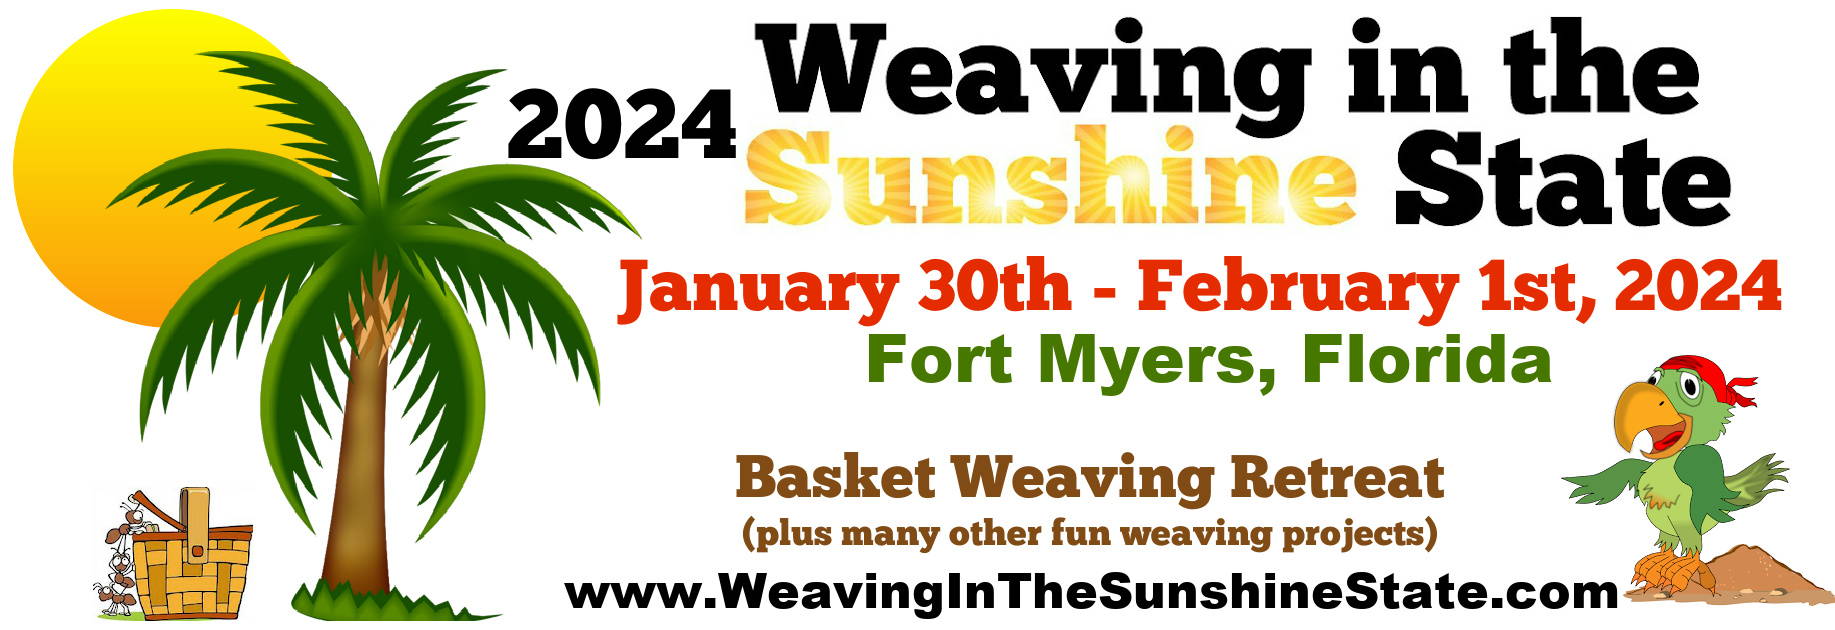 2024 Weaving in the Sunshine State